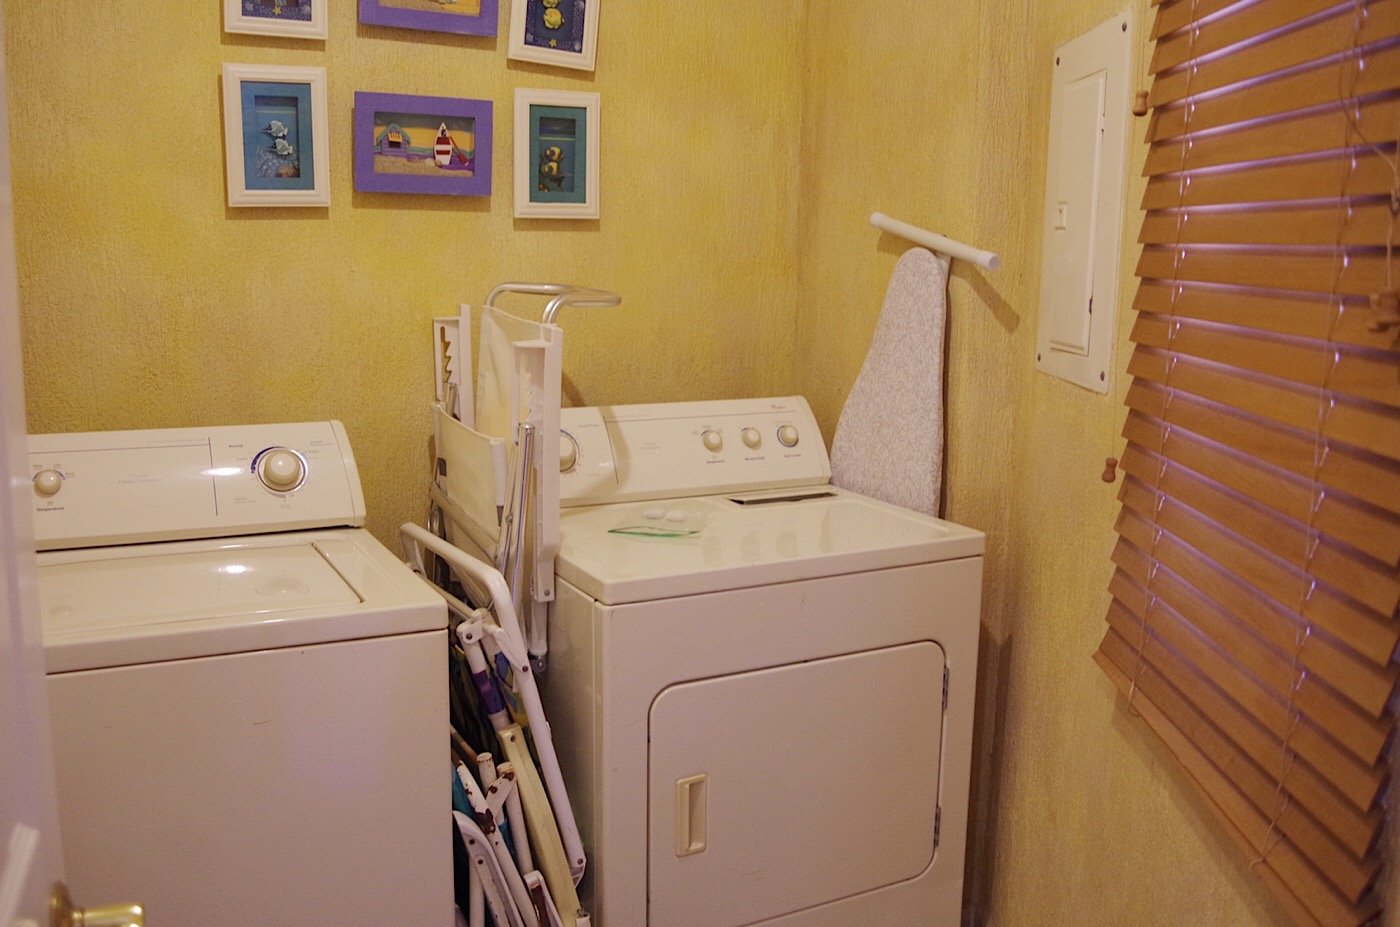 Full sized washer and dryer in separate utility room by the entrance door